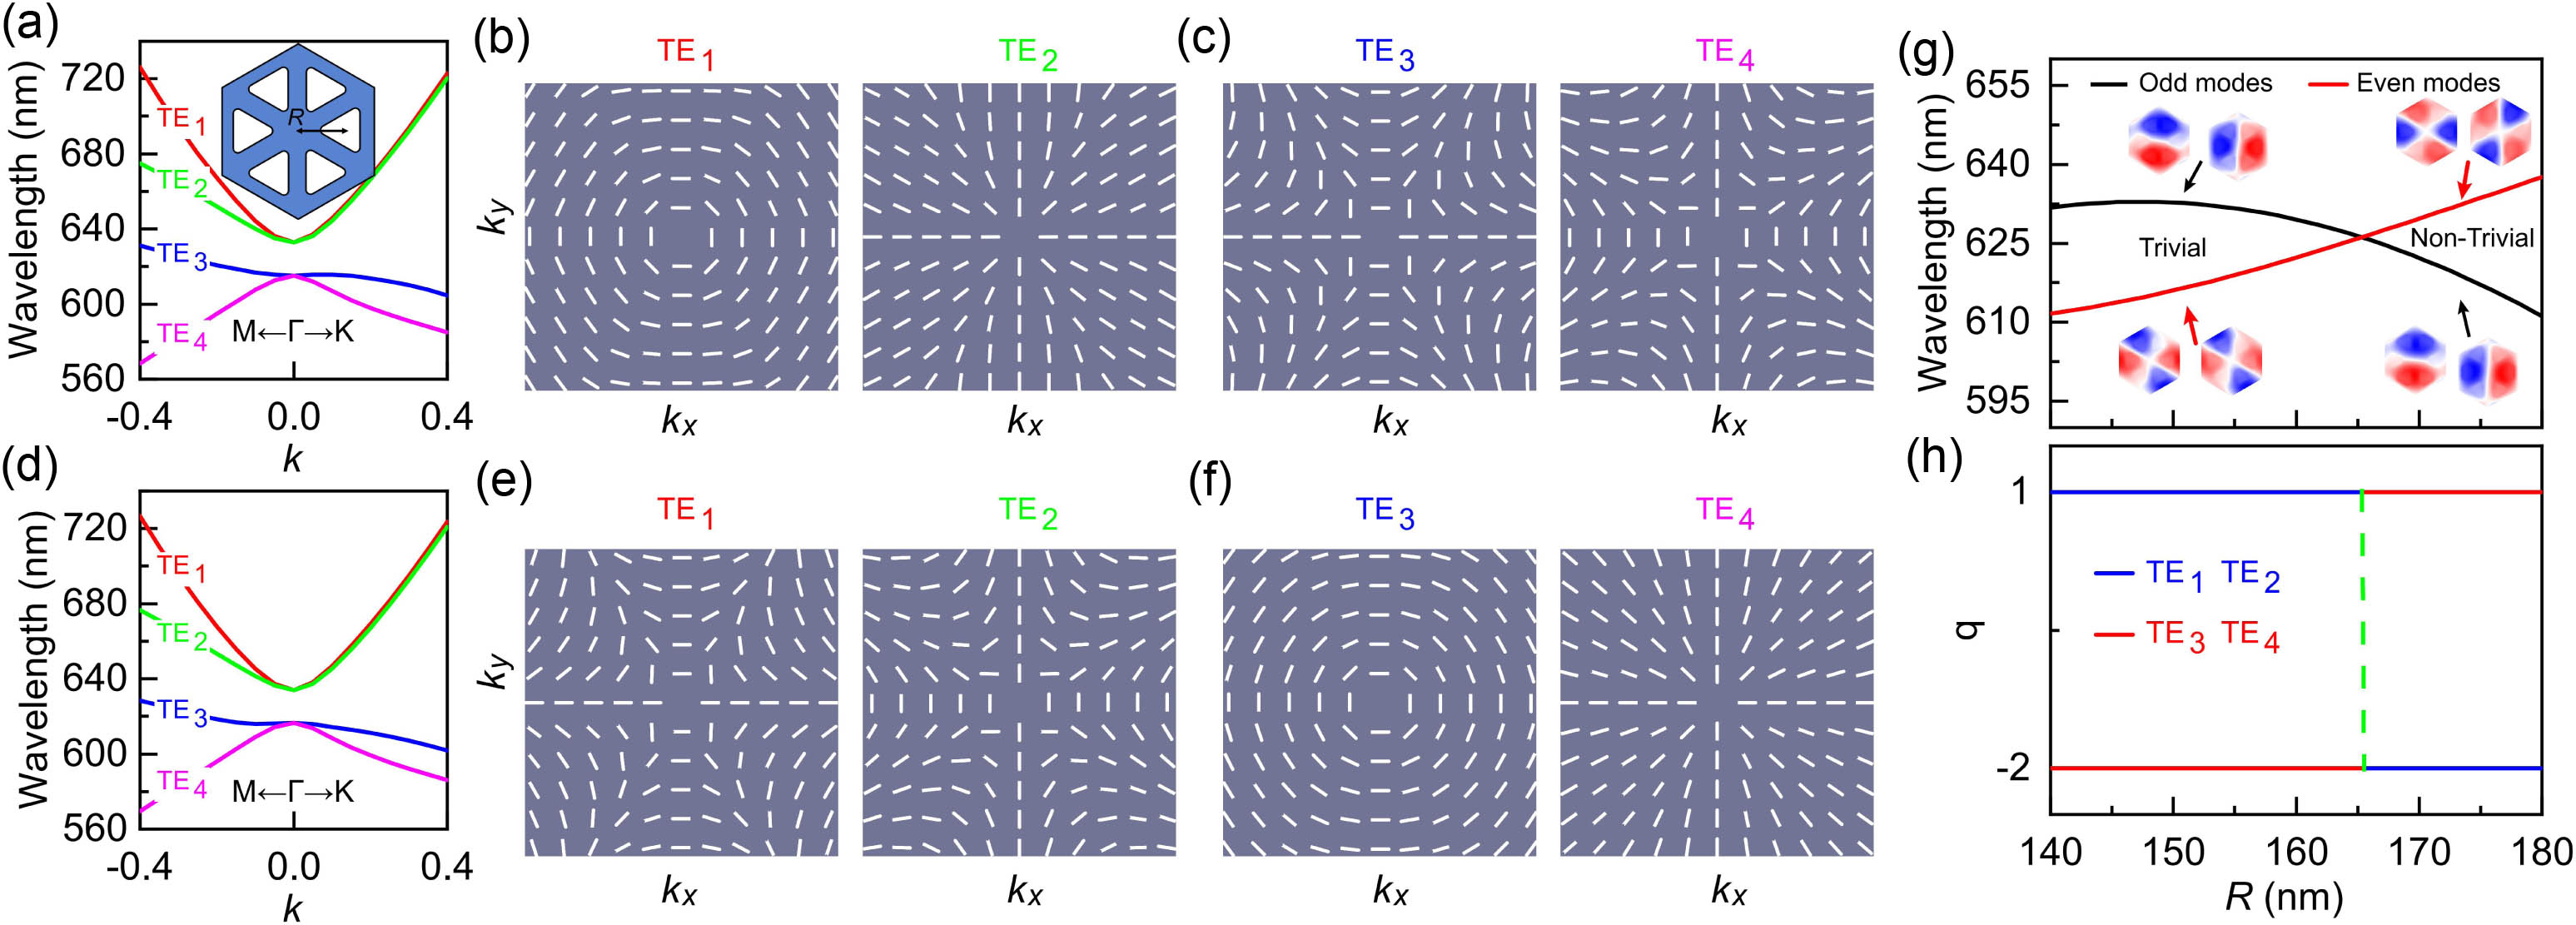 Probing phase transition of band topology via radiation topology for optical analogs of the QSHEs. The graphene-like SiNx PhCSs are shown in the inset of (a). R is the distance from the center of the triangular air hole to the center of the unit cell. (a), (d) Calculated transverse electric (TE)-like band structure with R=148 nm in (a) and R=175.5 nm in (d). (b), (c) and (e), (f) Calculated far-field polarization vectors (white lines) around the center of the Brillouin zone for the four photonic bands in (a) and (d), respectively. (g) Illustration of topological phase transition of band topology with R. The insets in (g) are the field distributions of the odd modes and even modes at Γ point for the z component of the magnetic field. (h) Evolution of topological charge q with R. The units of k and kx (ky) are 2π/P and π/P (π/P), respectively. The ranges of kx and ky are from −0.1 to 0.1. The change of q after the band inversion is three for the four bands, while the change of the topological invariant (spin Chern number) of the TE1/2 (TE3/4) band is ±1 (∓1).